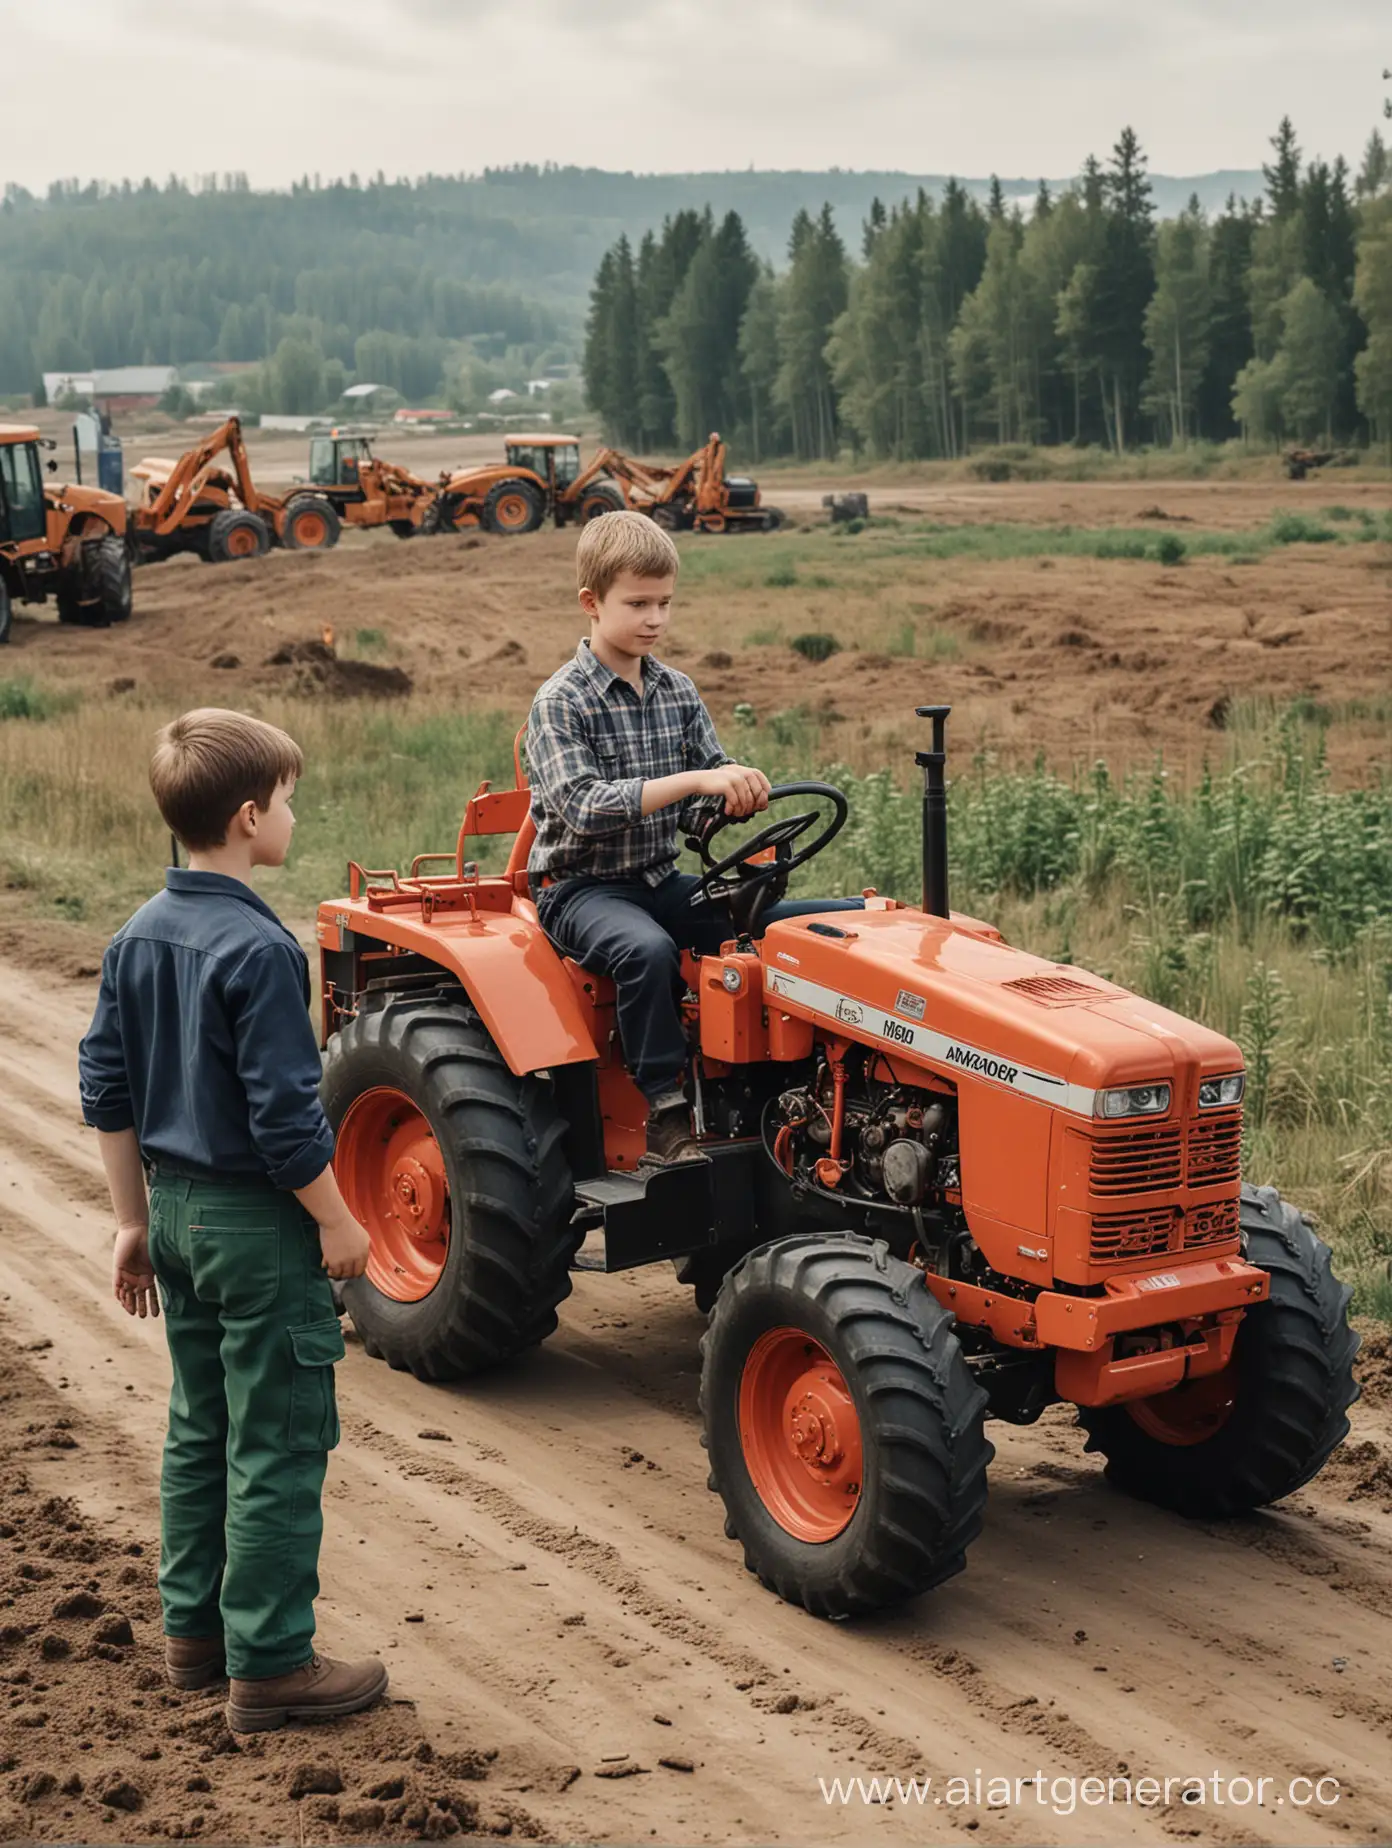 Father-and-Son-with-Amkodor-Toy-Tractor-Facing-W500C-Loader